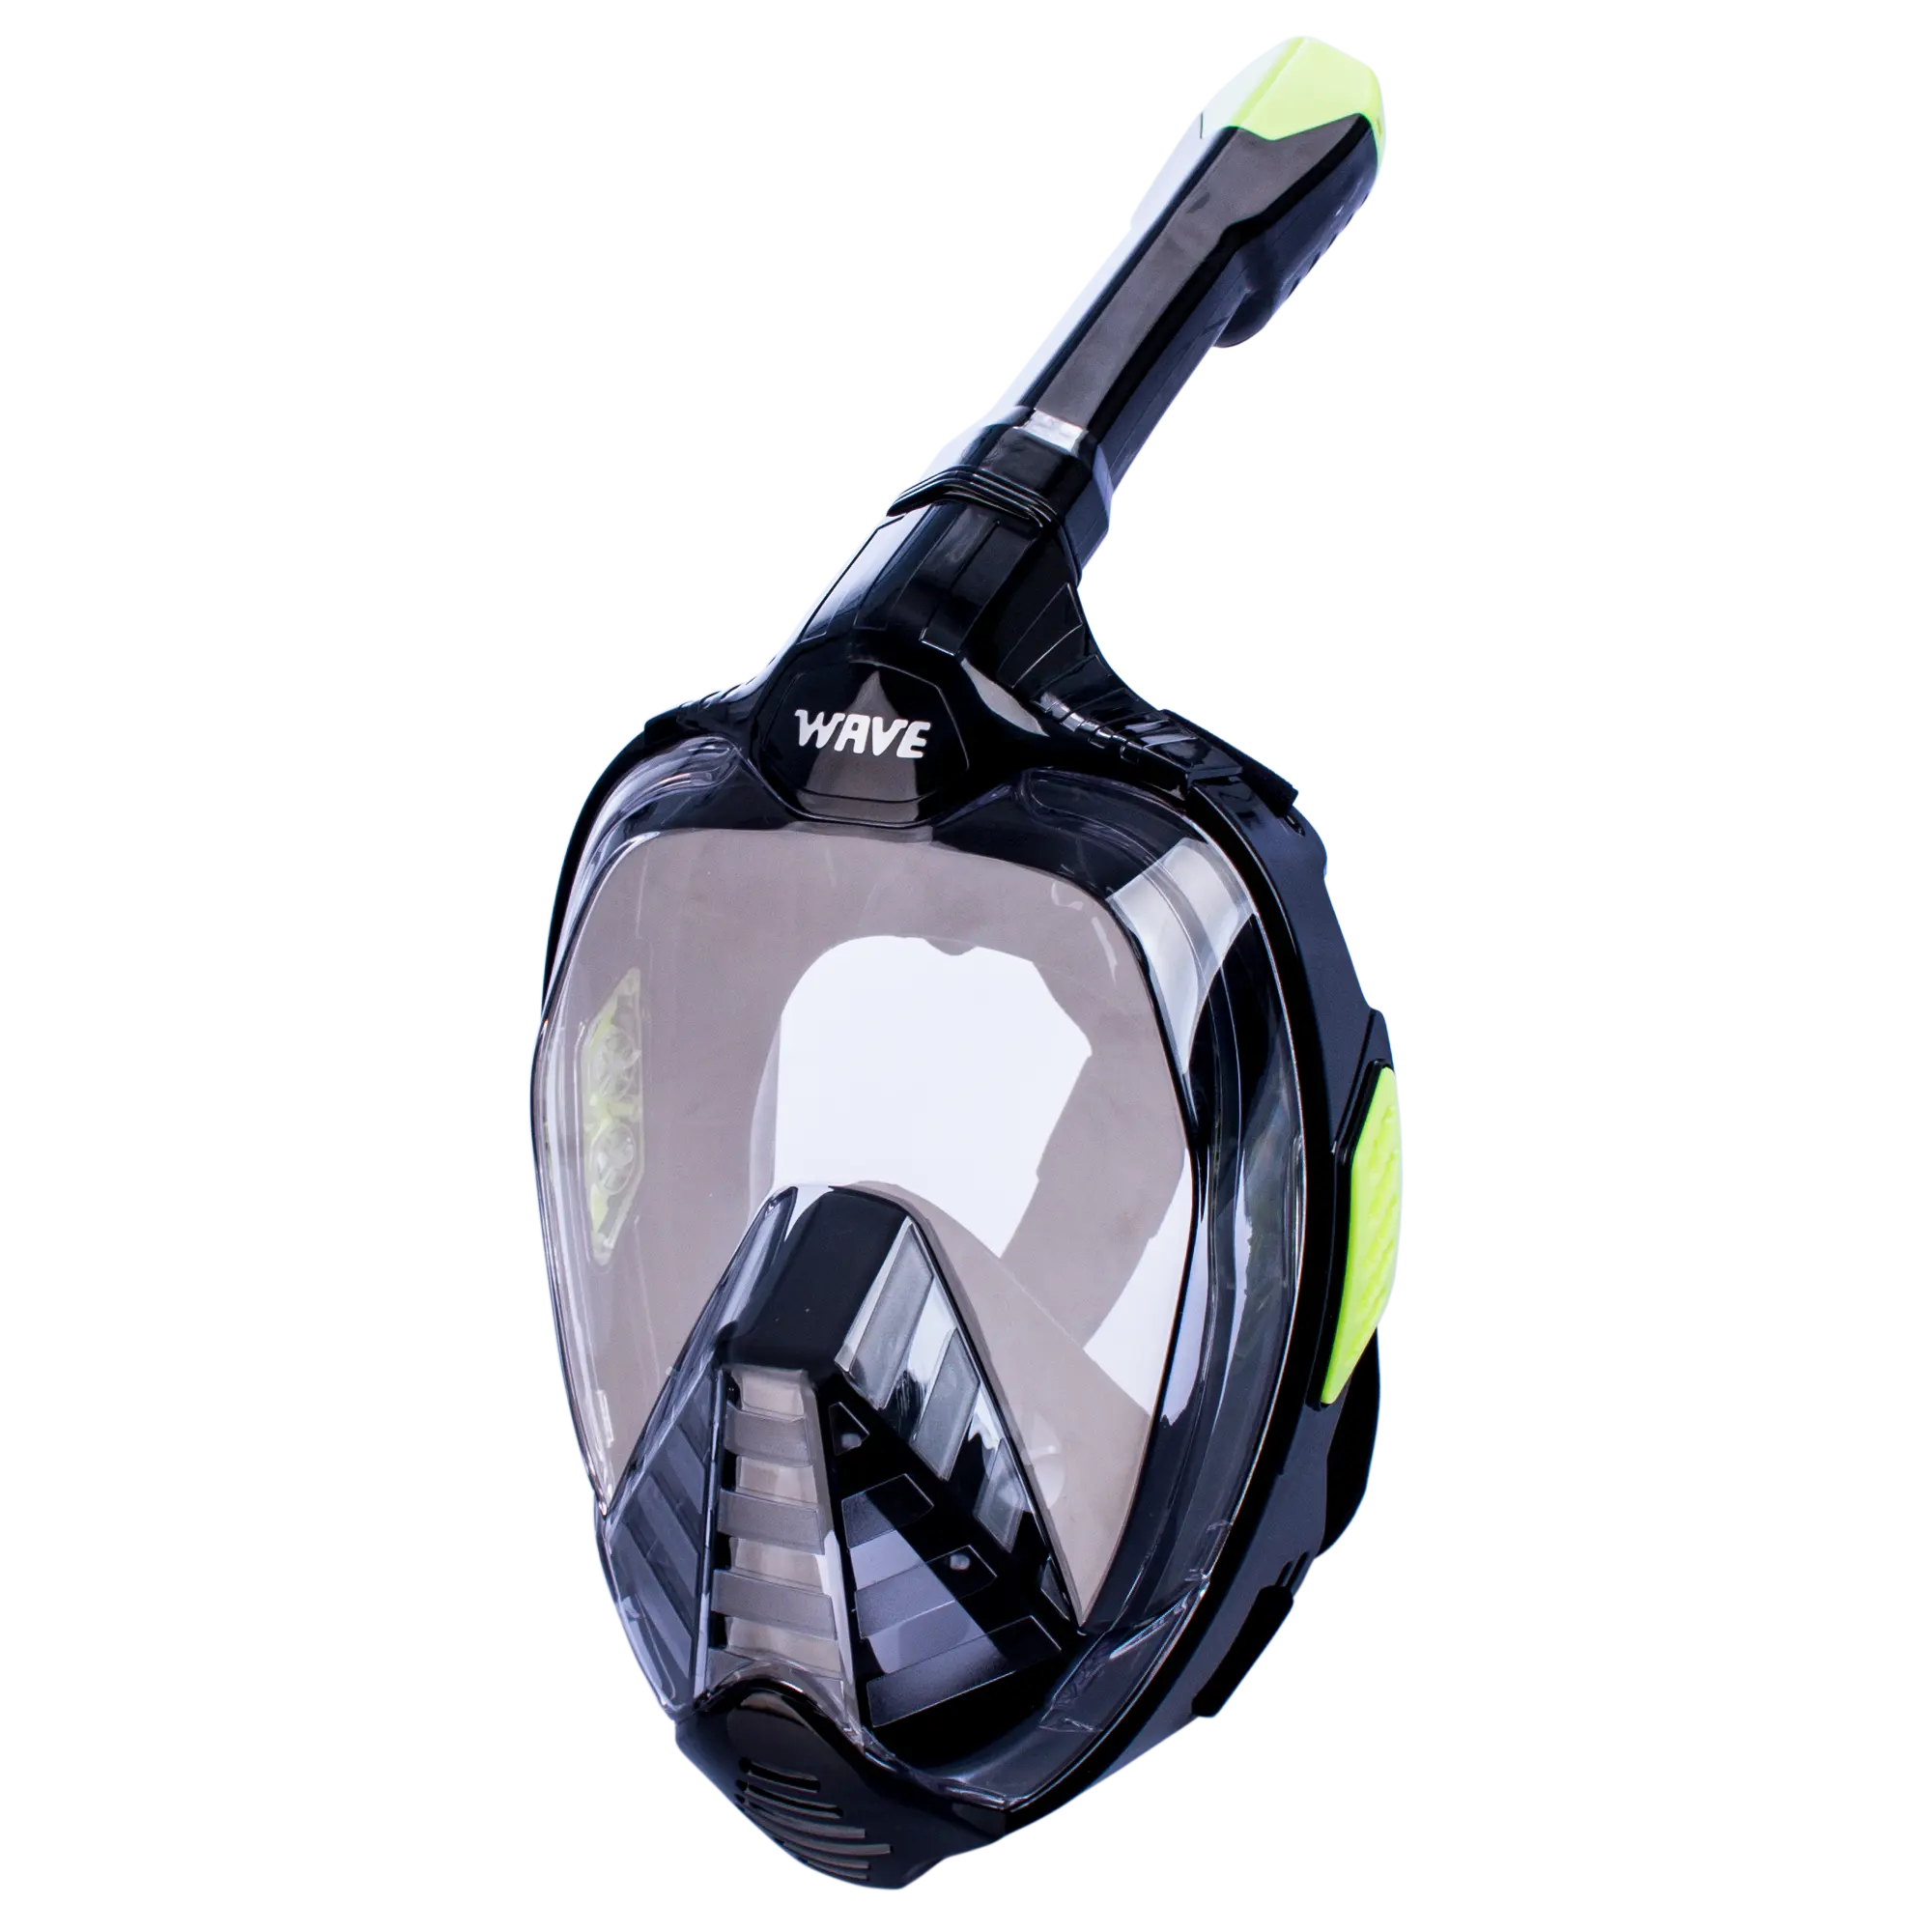 Pro for wave маска. Mad Wave маска. Wave snorkling Mask. Pro for Wave маска основной уход.